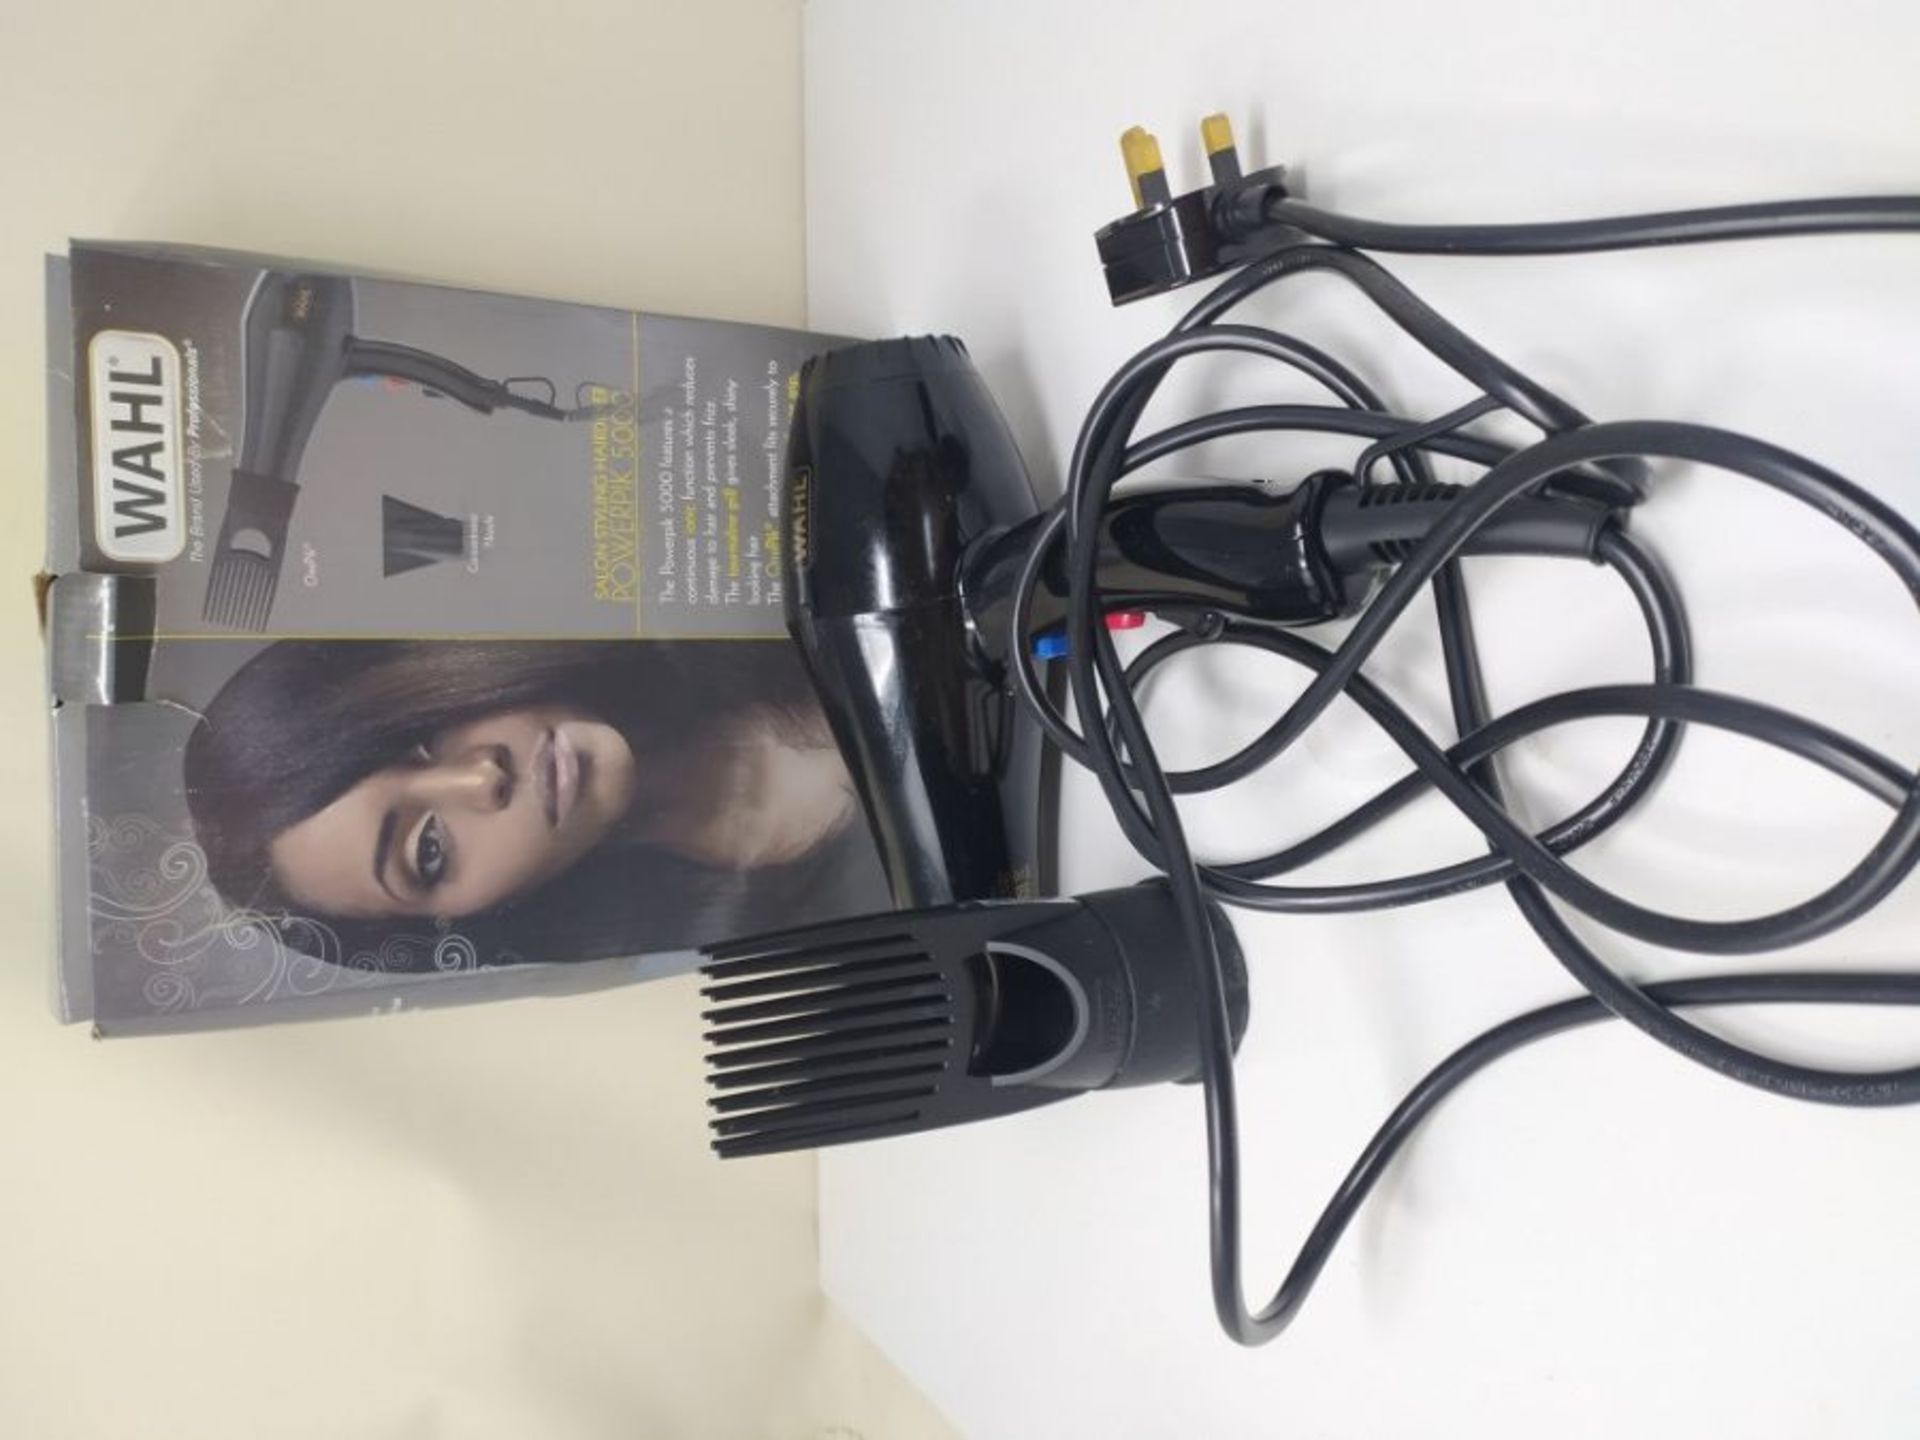 Wahl Hairdryers for Women PowerPik 5000 Hair Dryer with Pik Attachment, Afro Hairdryer - Image 2 of 2